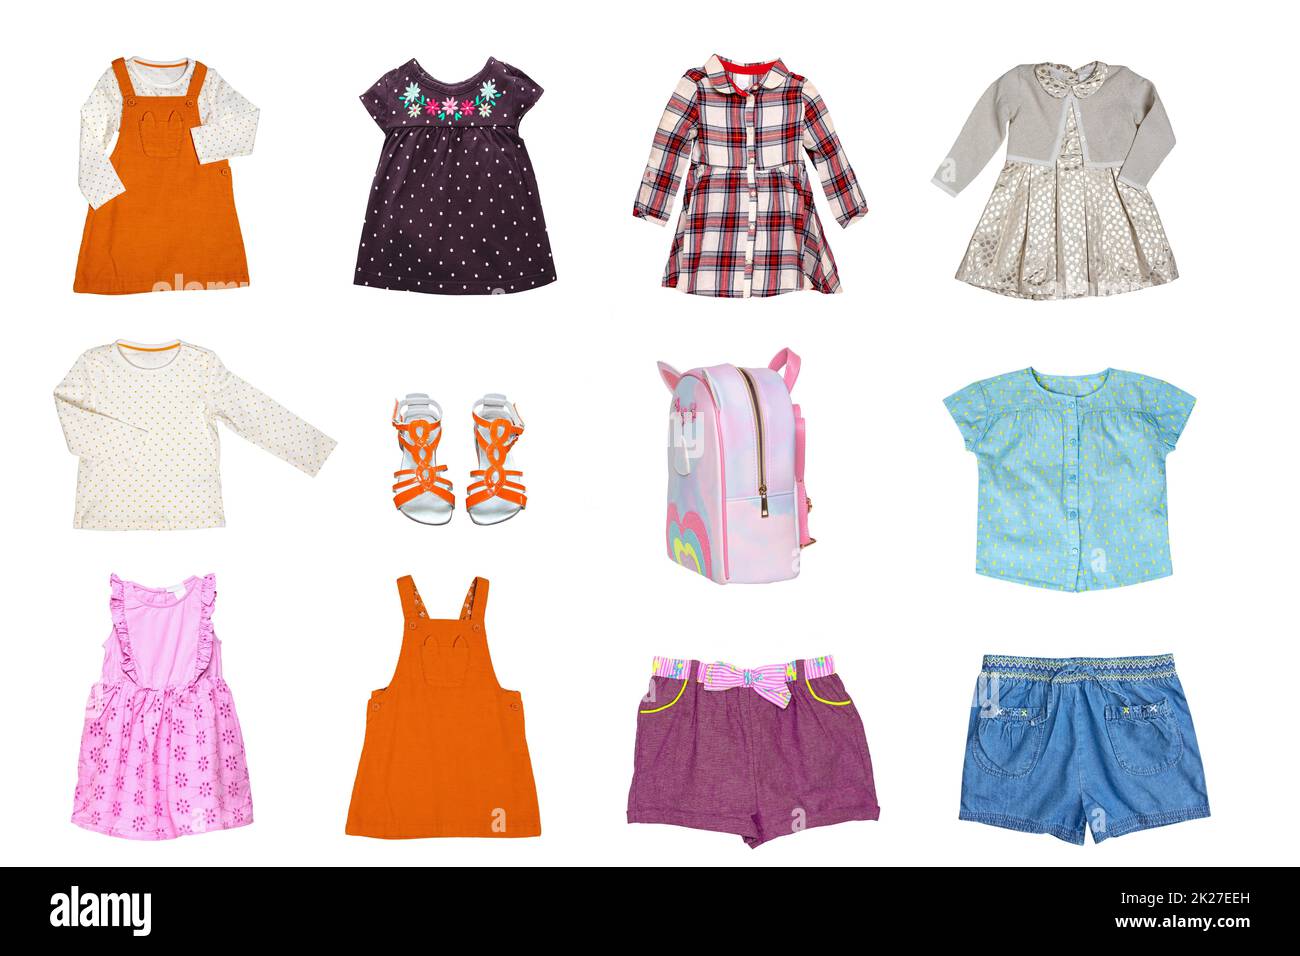 Collage set of little girls summer clothes isolated on a white background. The collection of many stylish dresses, denim shorts, shoes, shirts and a bag.  Children's spring and autumn fashion. Stock Photo